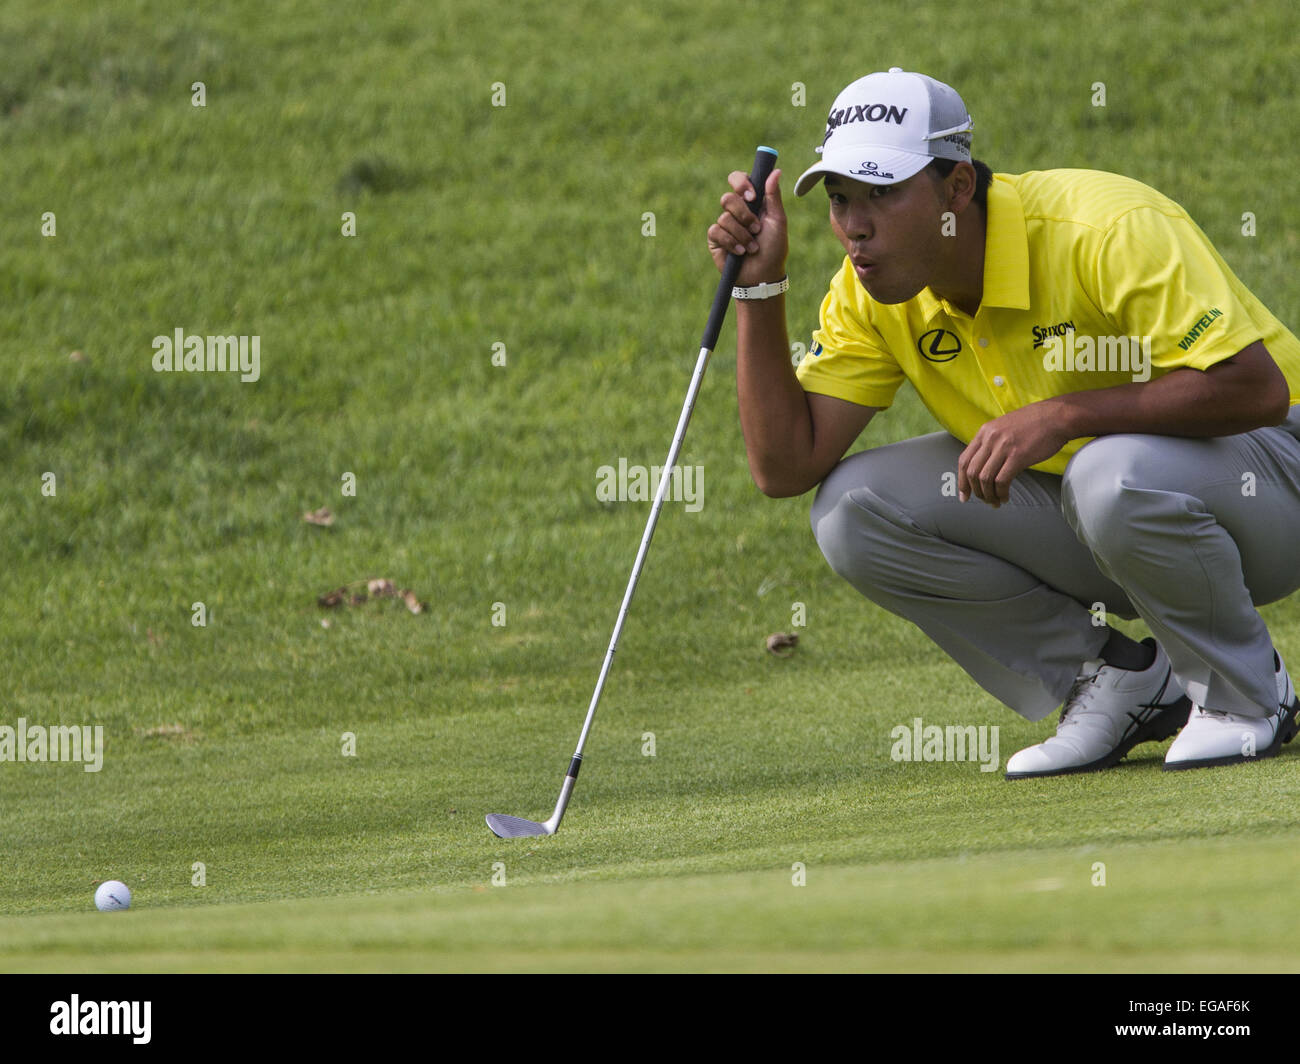 Los Angeles, California, USA. 20th Feb, 2015. Hideki Matsuyama of Japan plays in the second round of the Northern Trust Open PGA golf tournament at Riviera Country Club in Los Angeles on Friday, February 20, 2015. Credit:  Ringo Chiu/ZUMA Wire/Alamy Live News Stock Photo